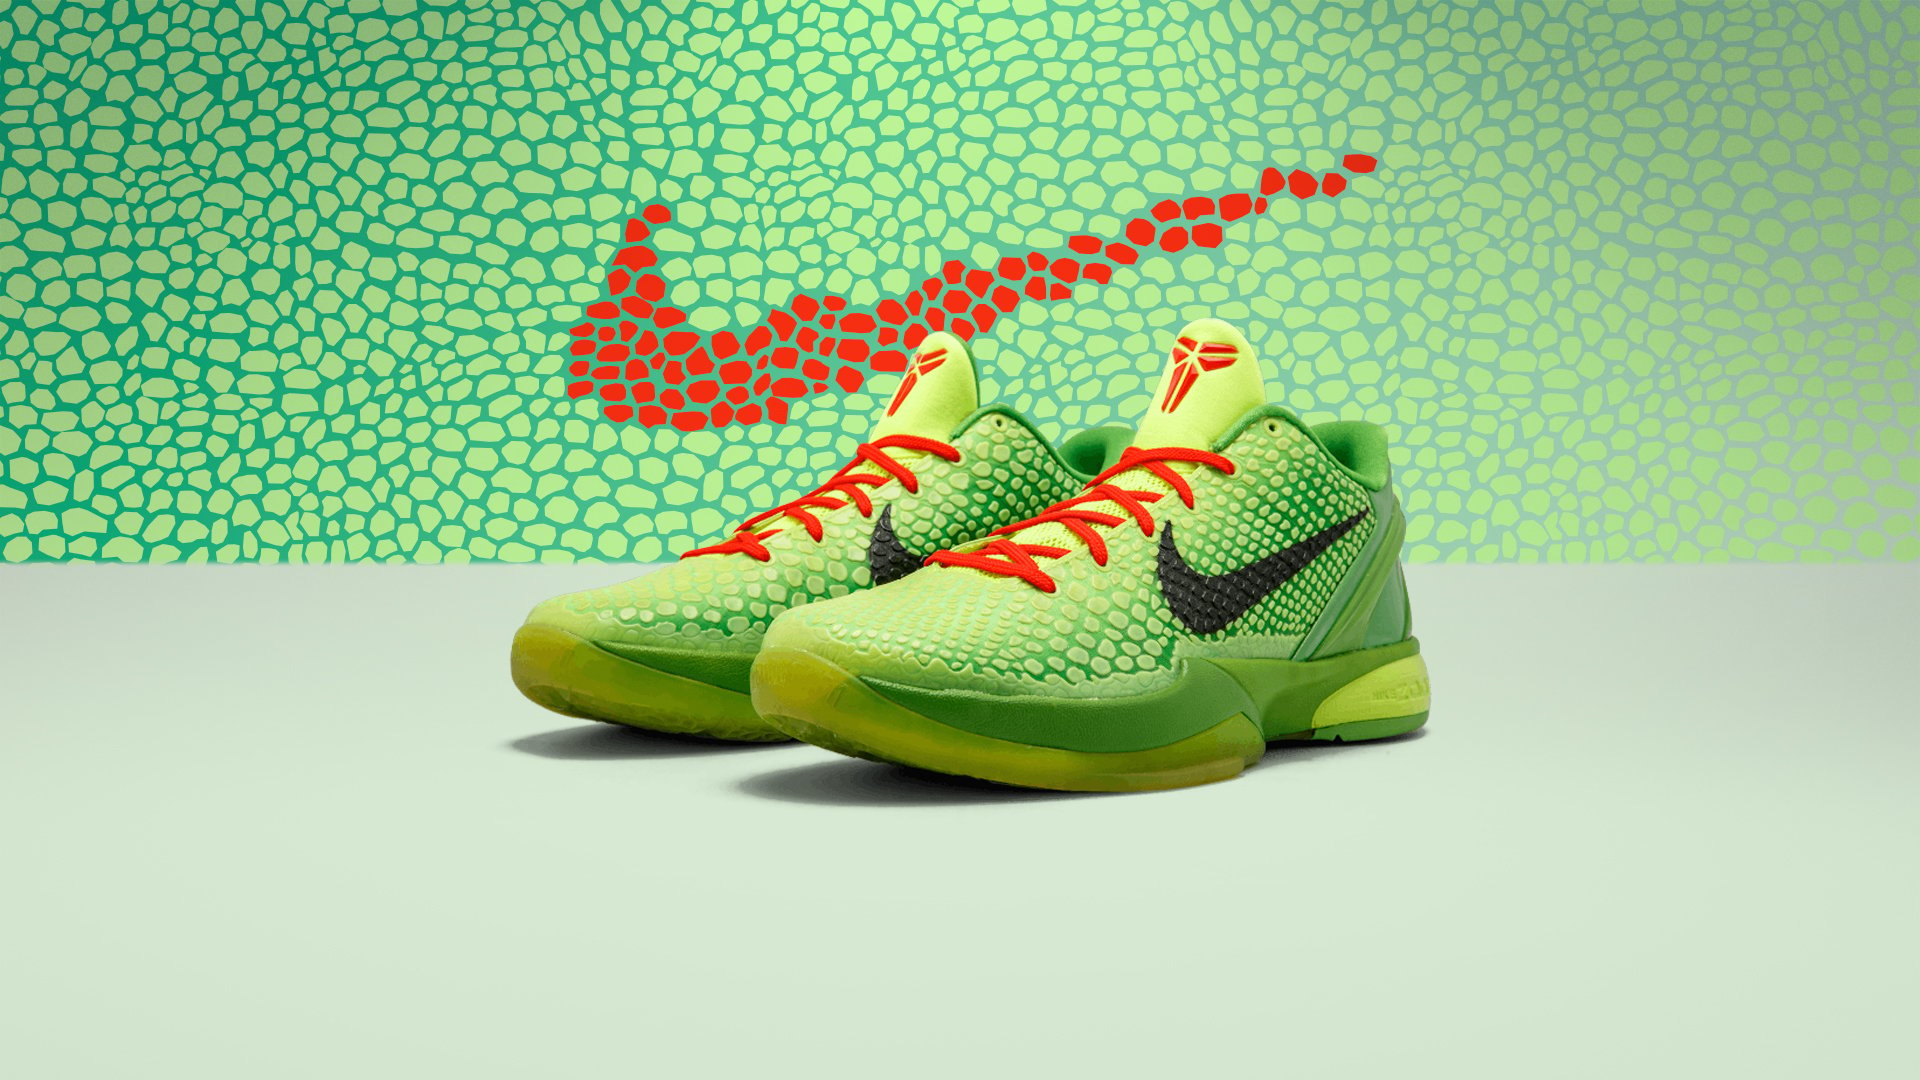 Nike Are Set To Revisit An Old Classic With The Kobe 6 Protro 'Grinch'